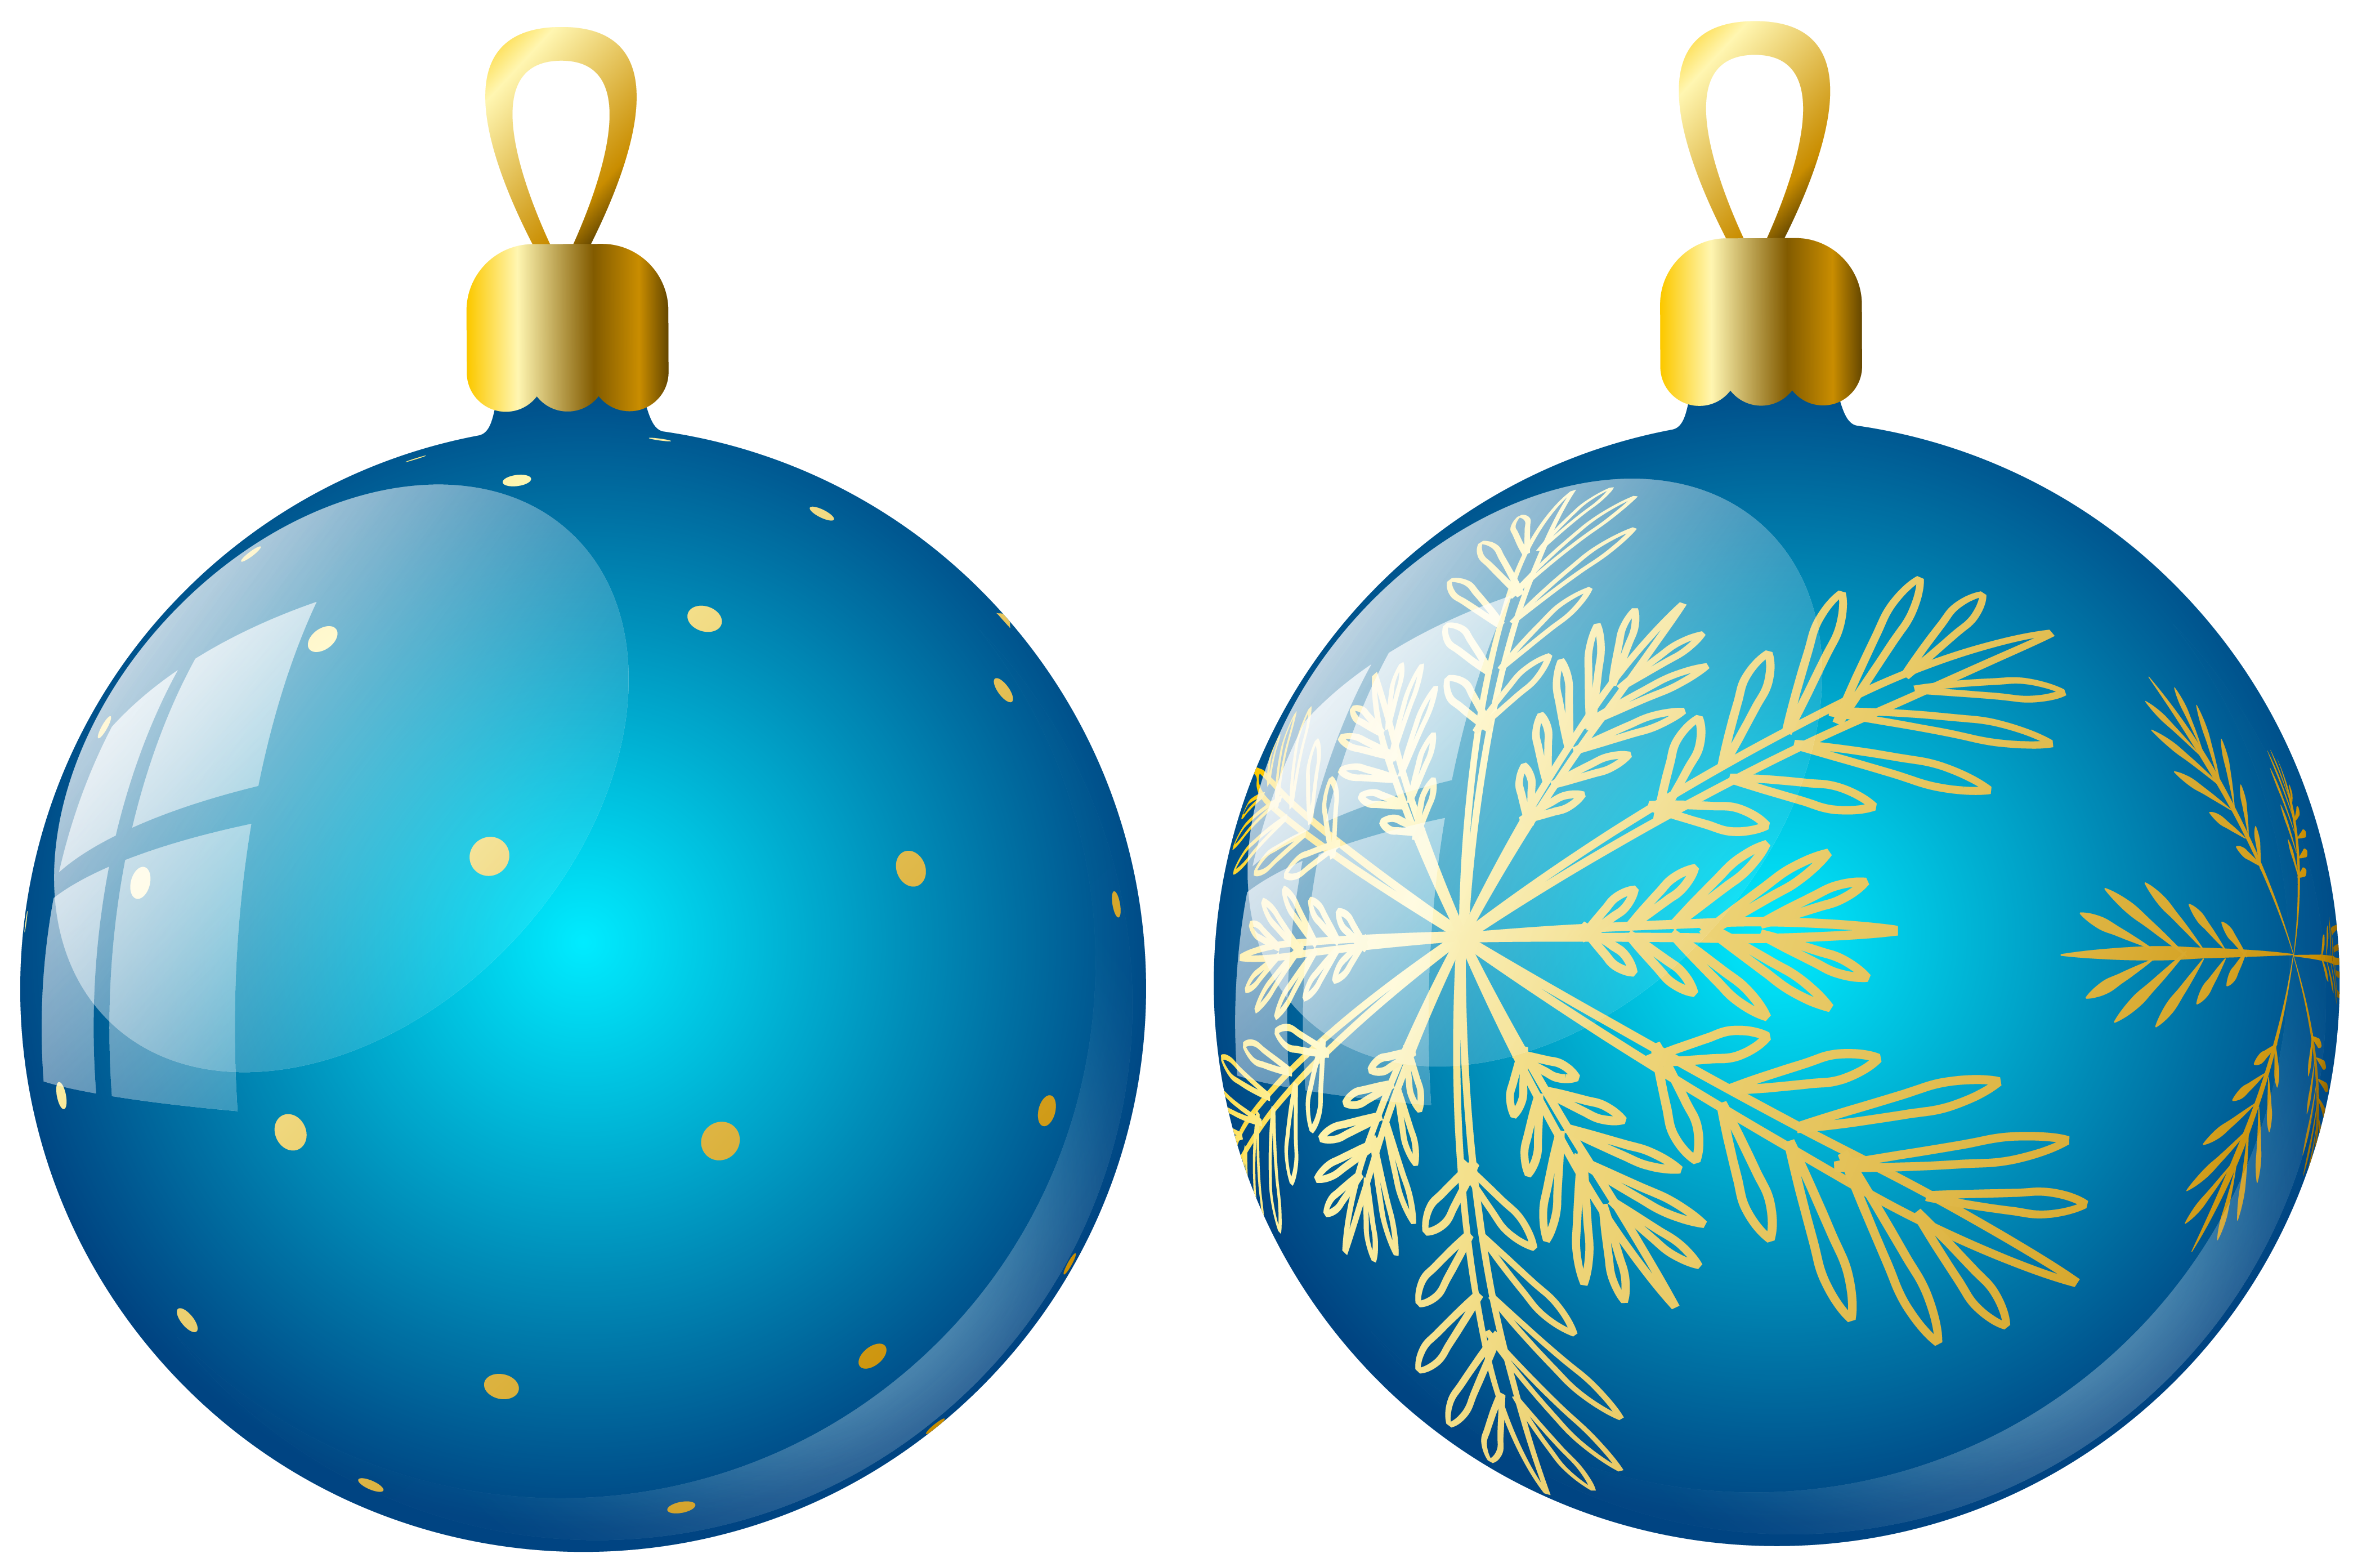 Free Blue Christmas Ornaments Png, Download Free Blue Christmas ...